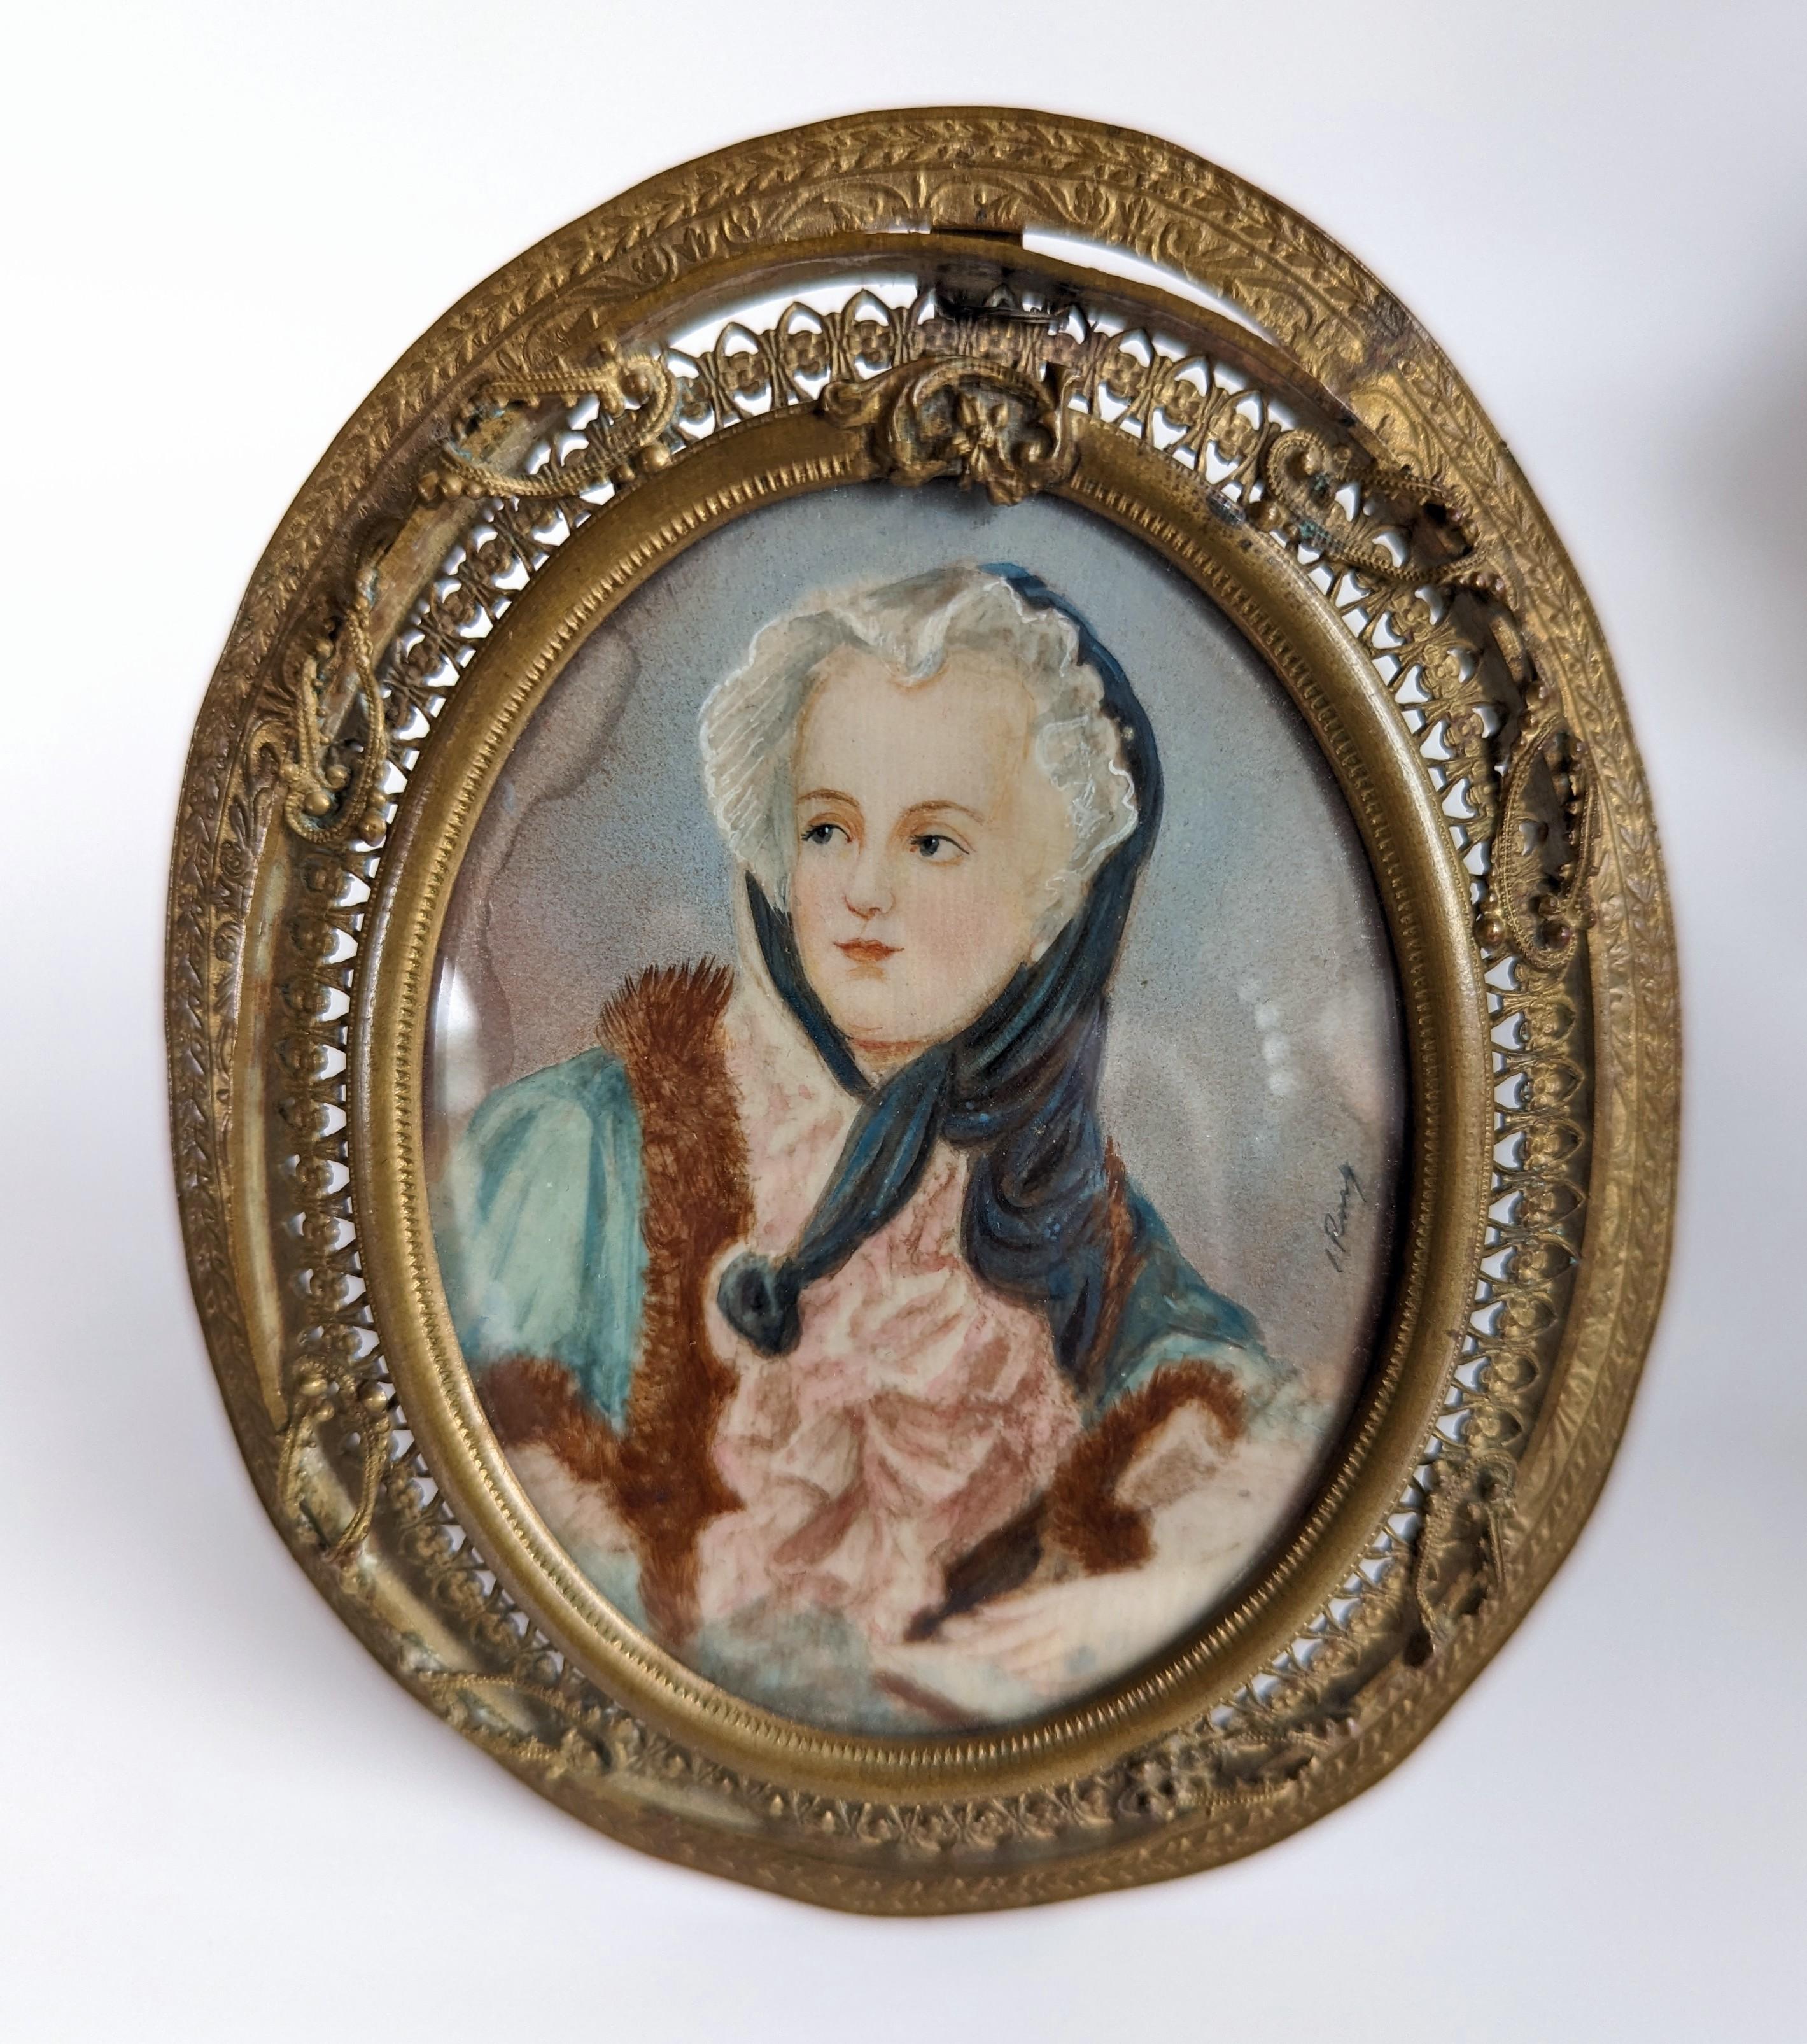 Stunning antique hand painted miniature portrait in filigree brass frame with easel back. Signed by the artisan on the corner of the painting as shown in the second to last photograph (unfortunately we are unsure who the artist is). Measures